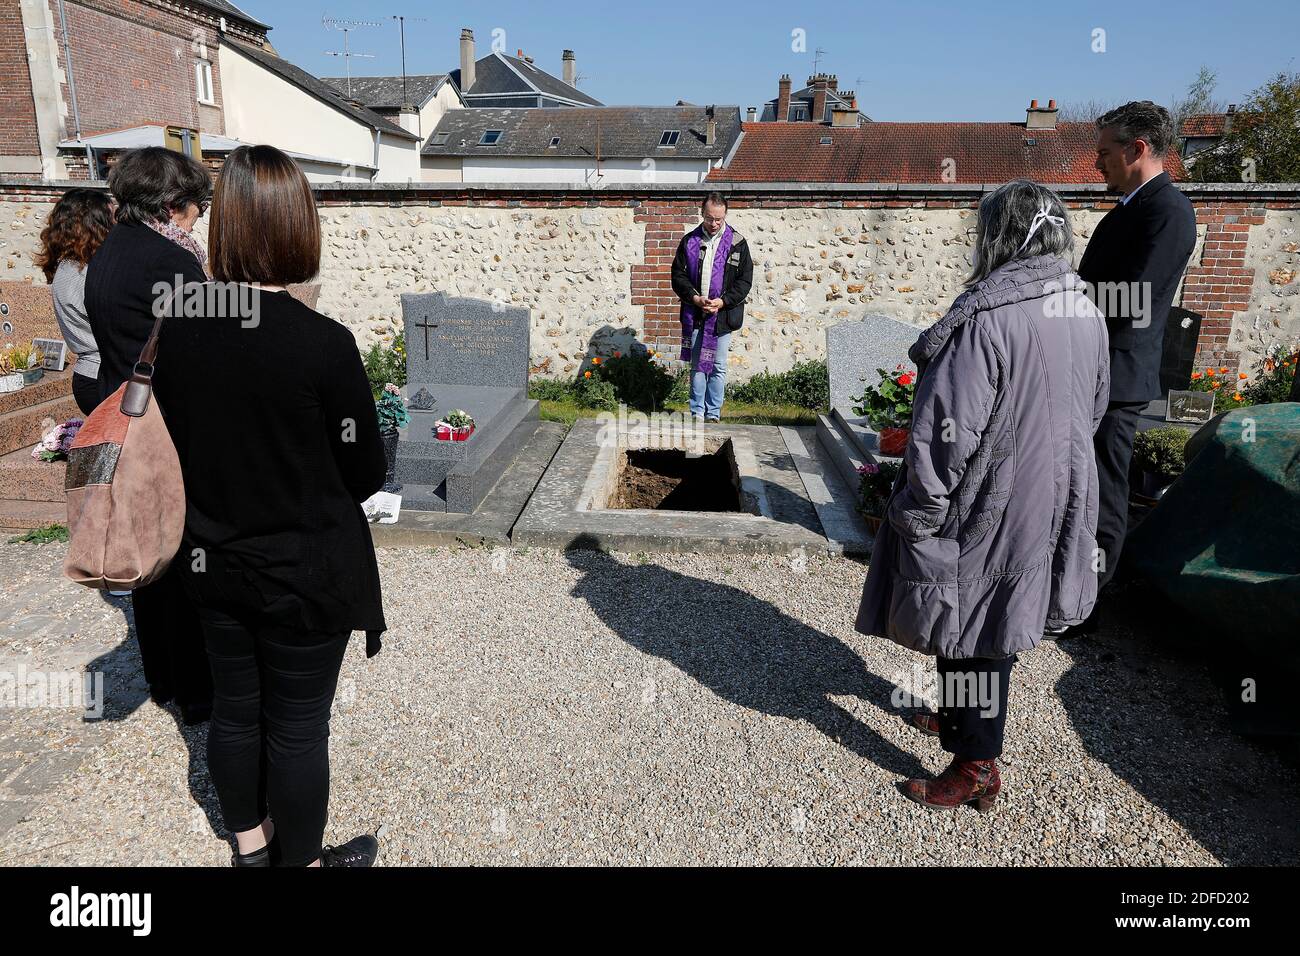 Funeral at evreux graveyard, france during covid-19 epidemic Stock Photo